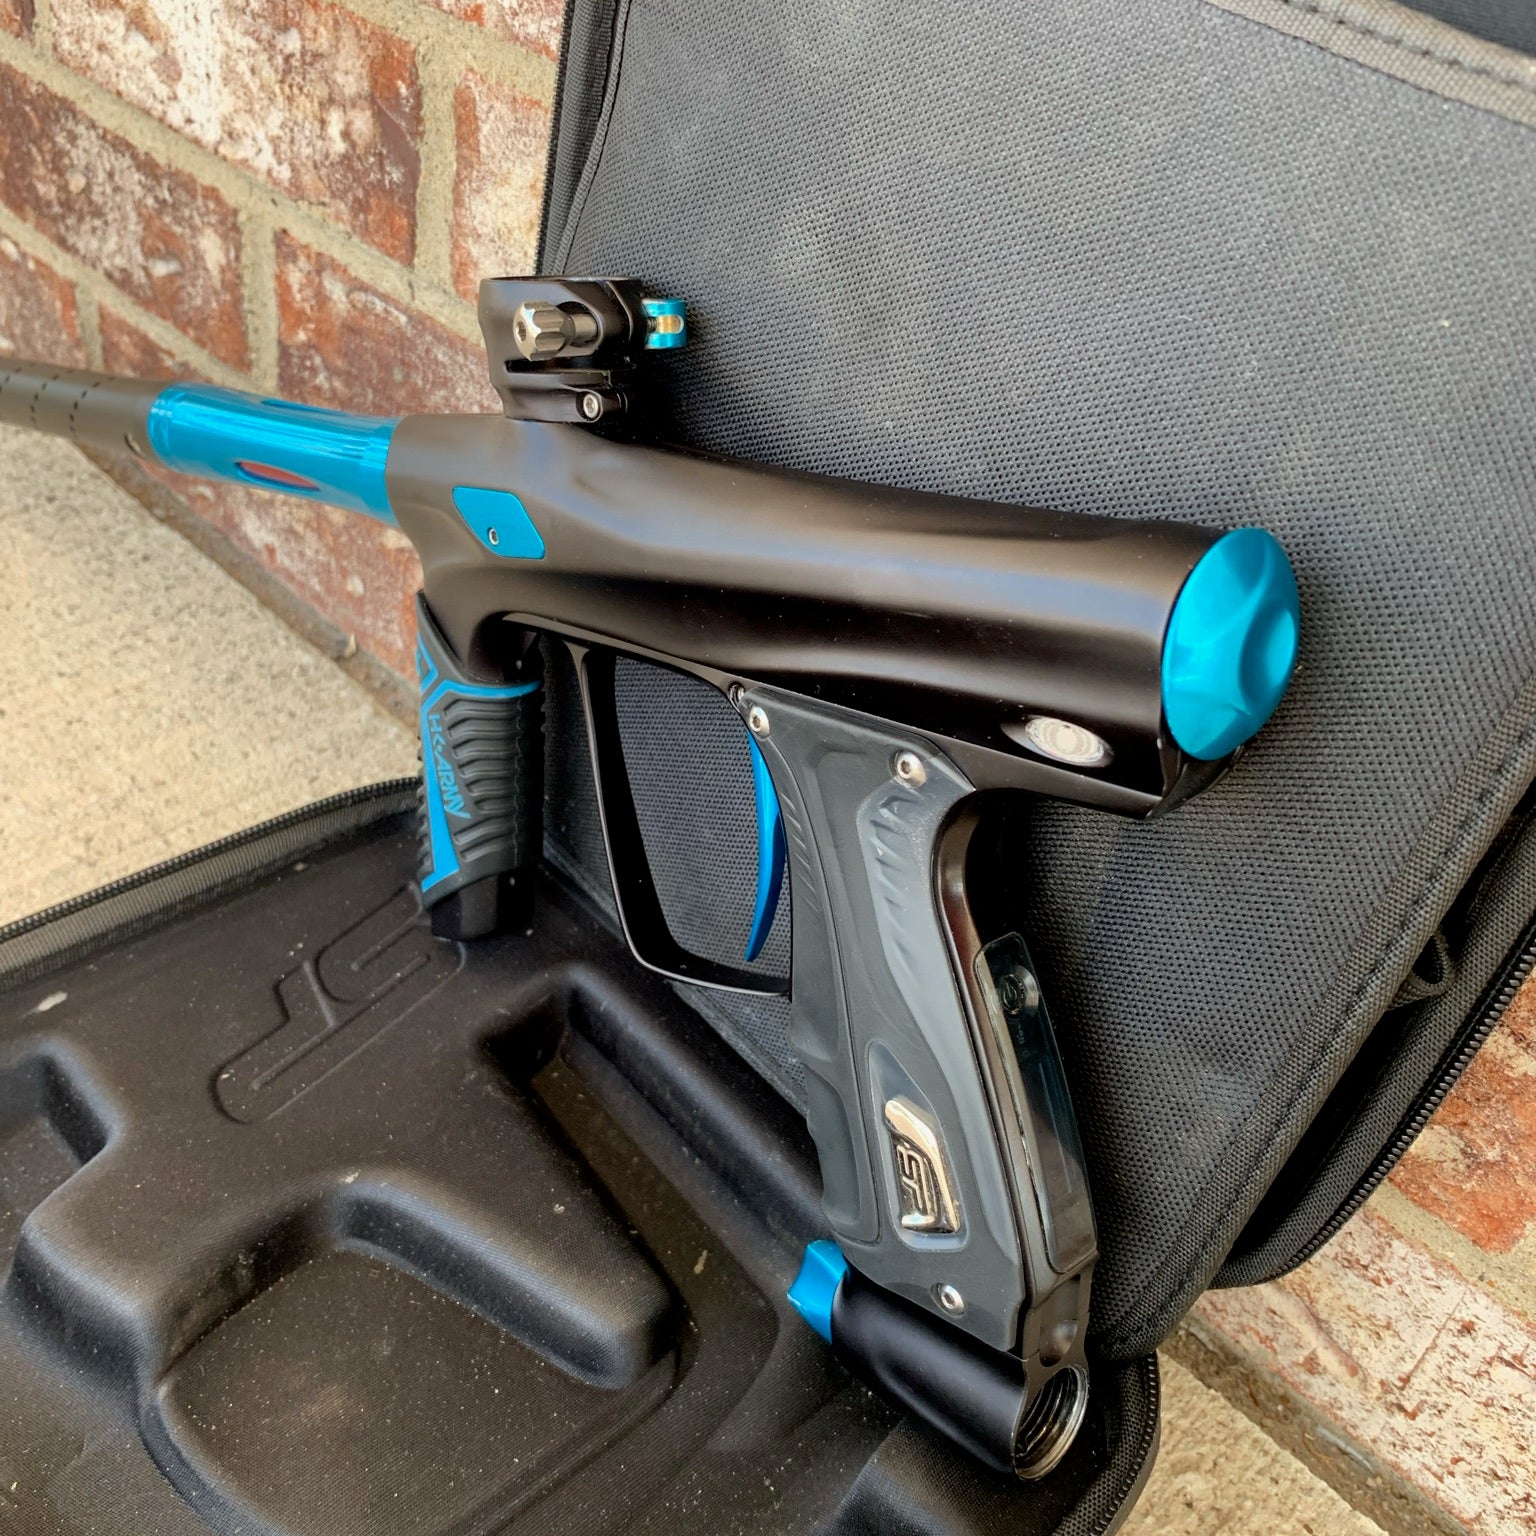 Used Smart Parts Shocker RSX Paintball Marker- Dust Black / Gloss Teal